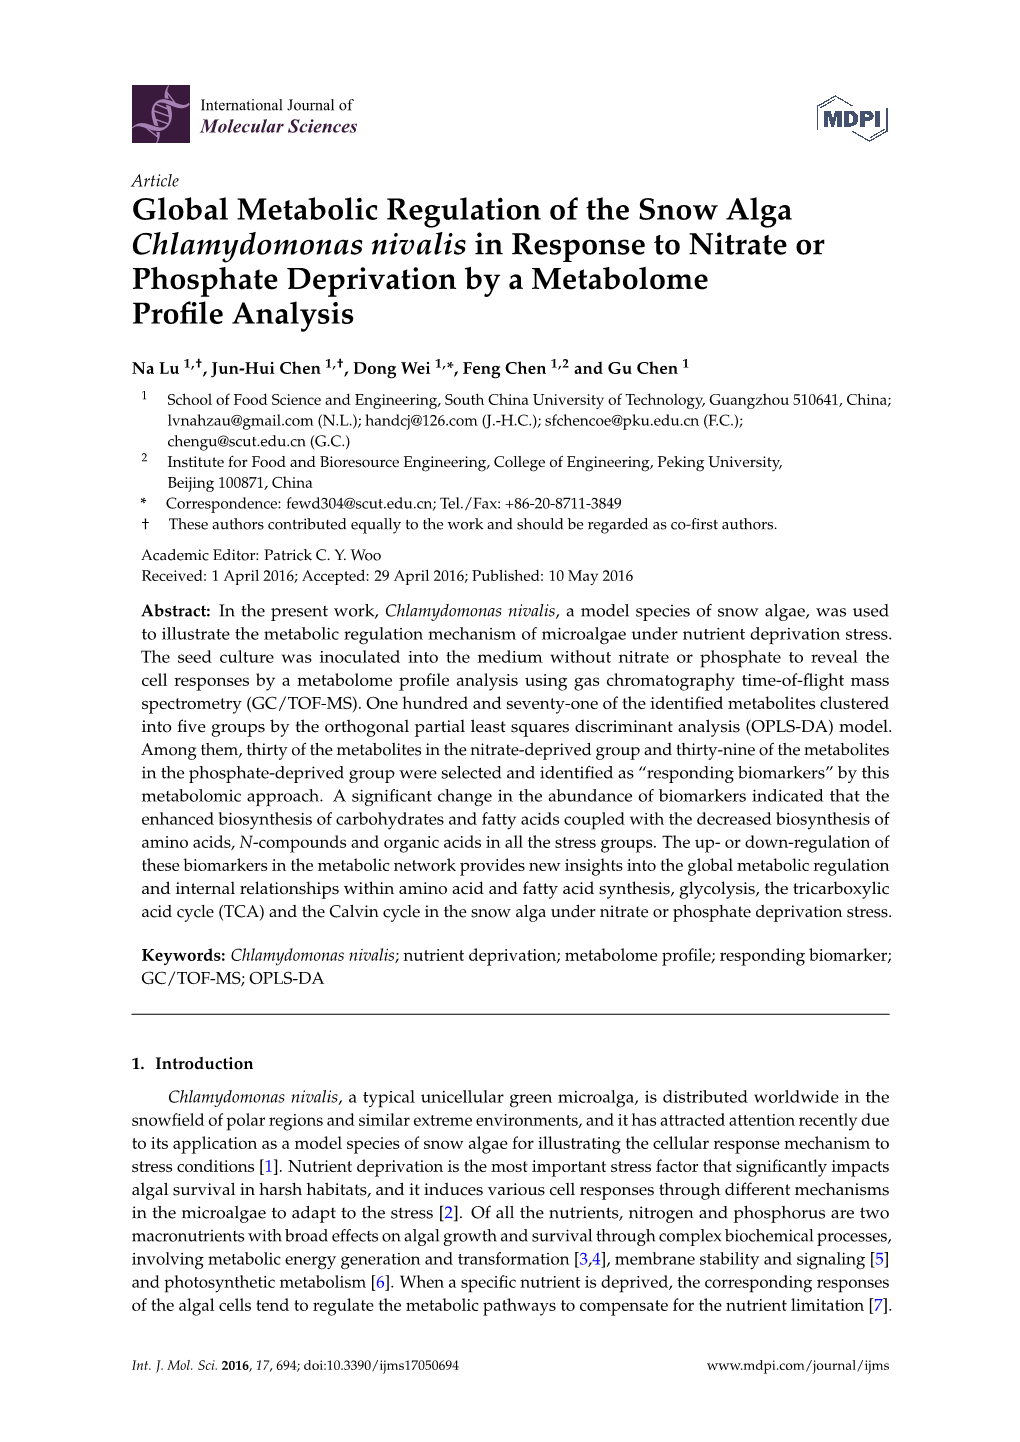 Global Metabolic Regulation of the Snow Alga Chlamydomonas Nivalis in Response to Nitrate Or Phosphate Deprivation by a Metabolome Proﬁle Analysis